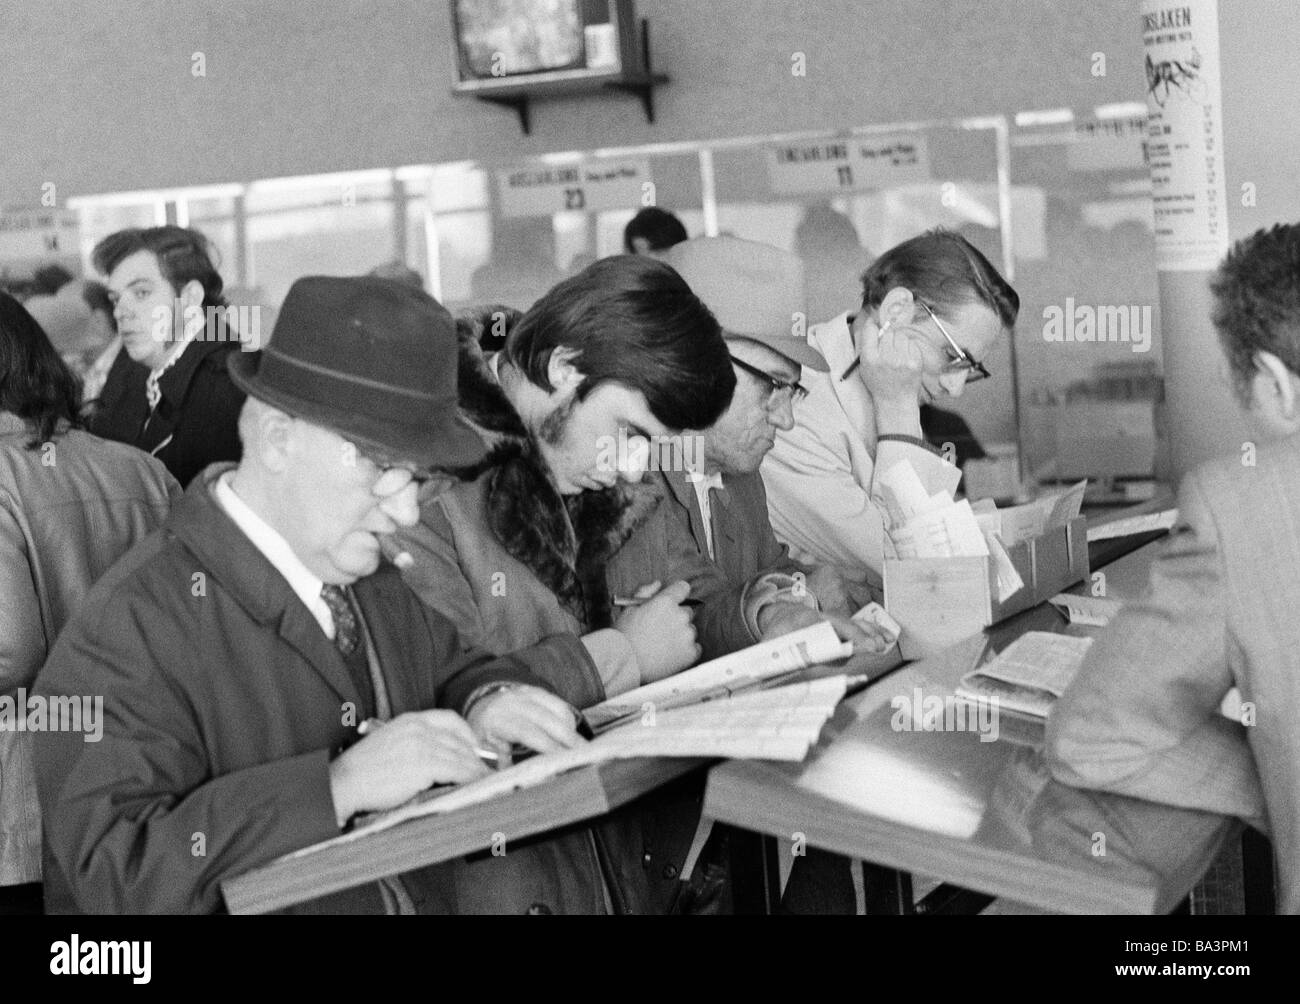 Seventies, black and white photo, sports, equestrianism, racecourse Dinslaken, trotting race 1973, horse-racing bet, men read the racing sheet, aged 25 to 30 years, aged 40 to 50 years, aged 60 to 70 years, D-Dinslaken, Lower Rhine, Ruhr area, North Rhine-Westphalia Stock Photo